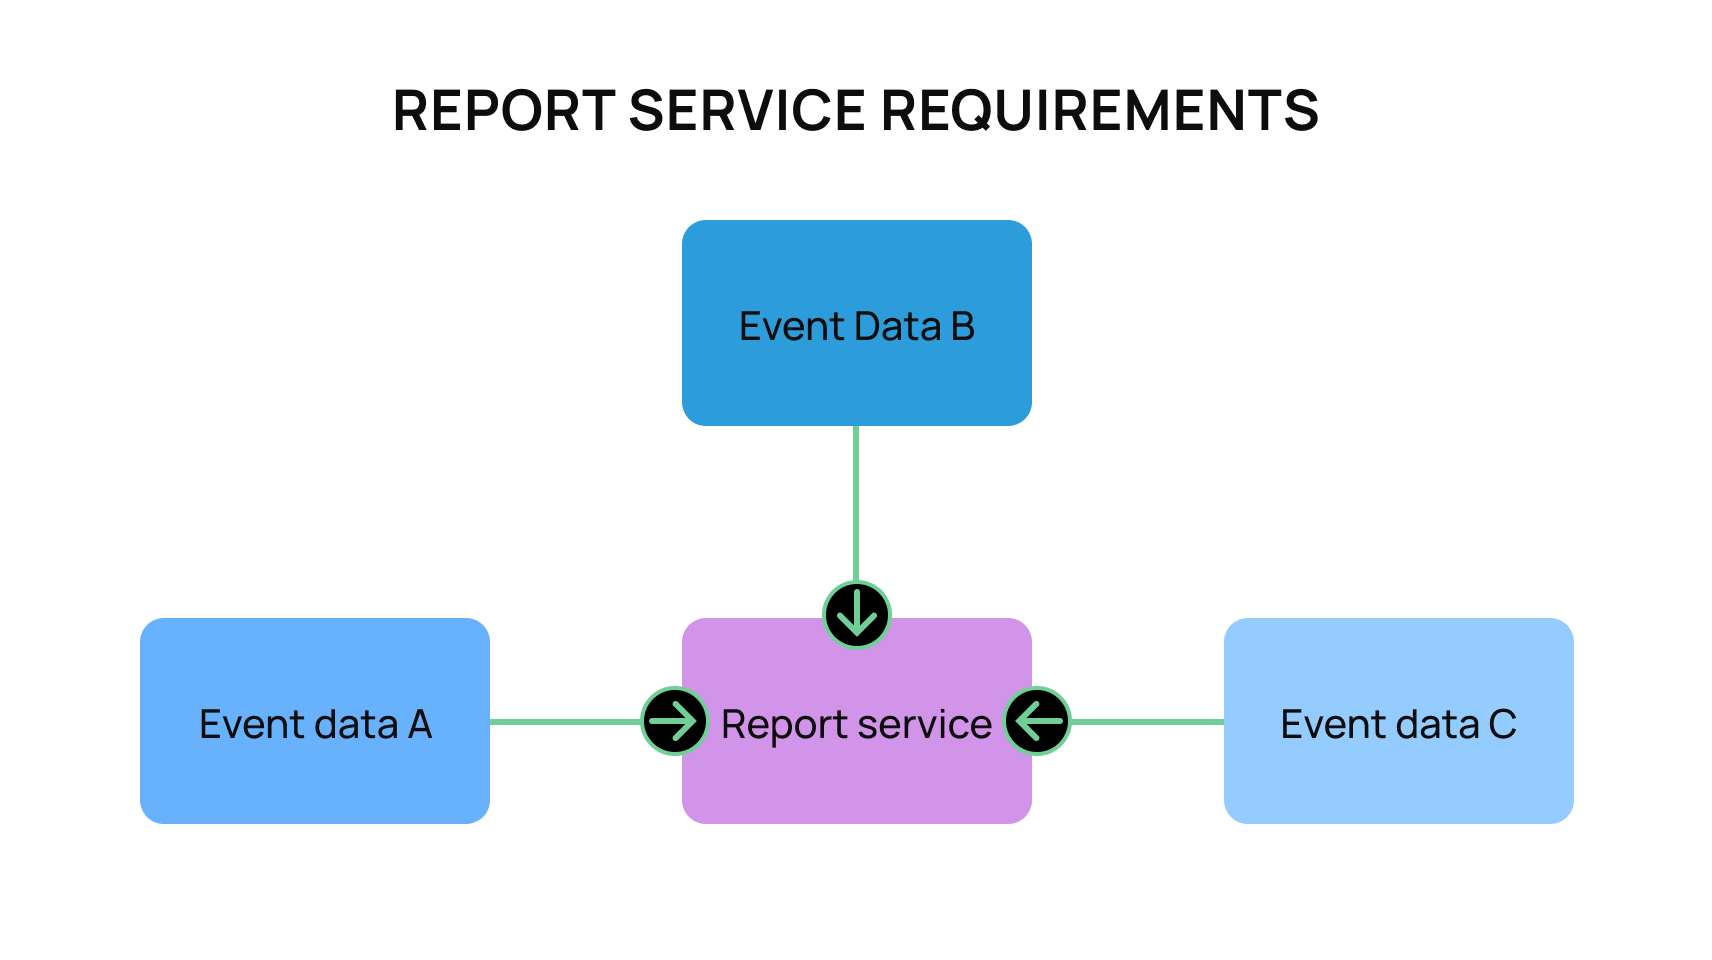 report-service-requirements